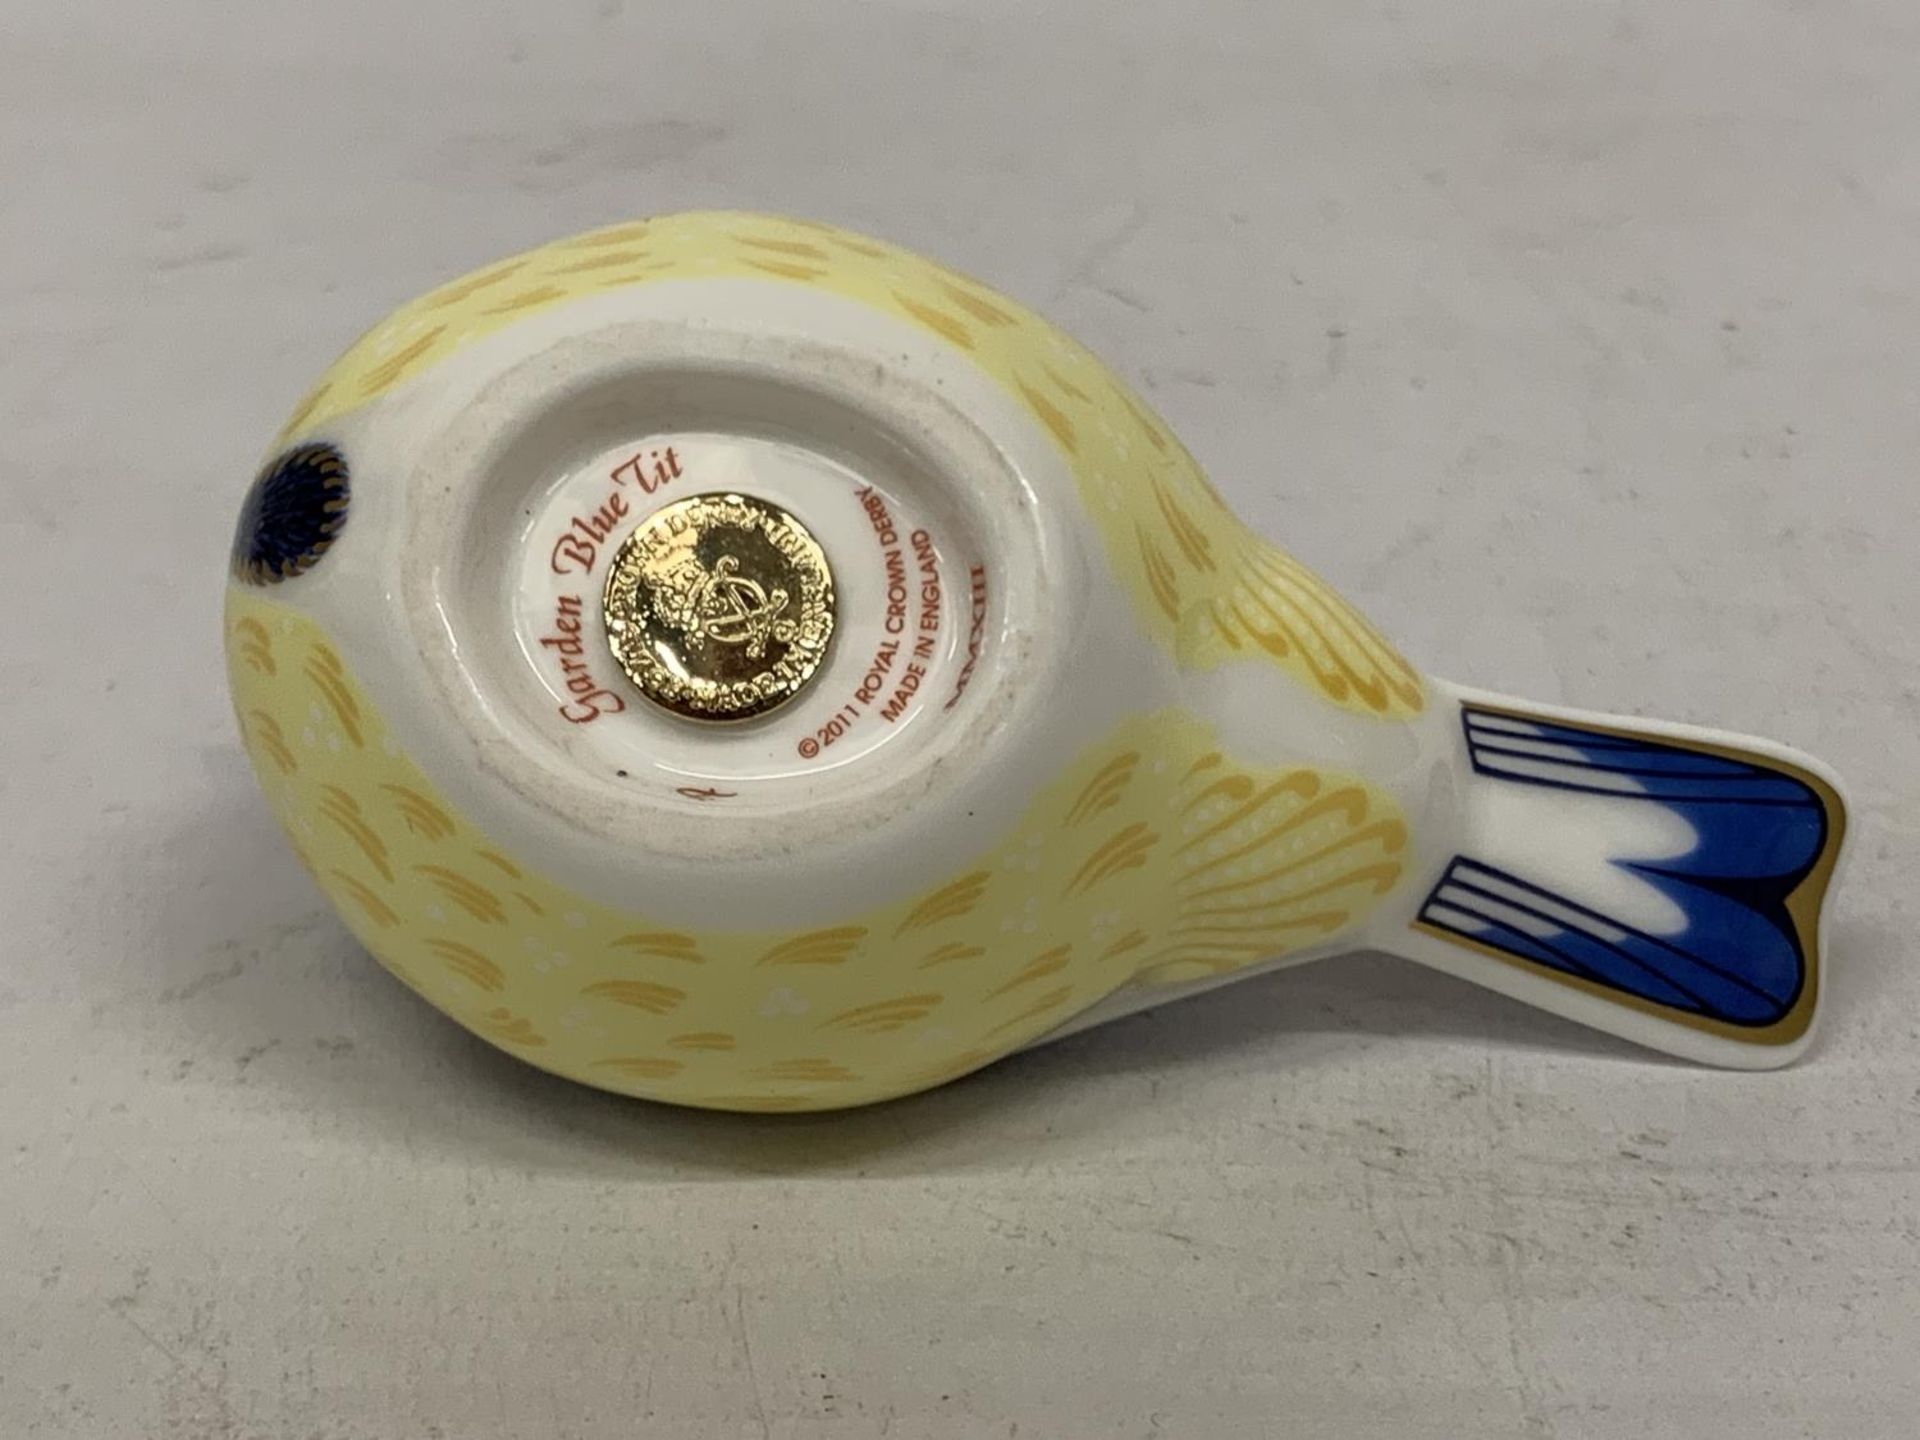 A ROYAL CROWN DERBY PAPERWEIGHT GARDEN BLUE TIT WITH GOLD COLOURED STOPPER - Image 3 of 3